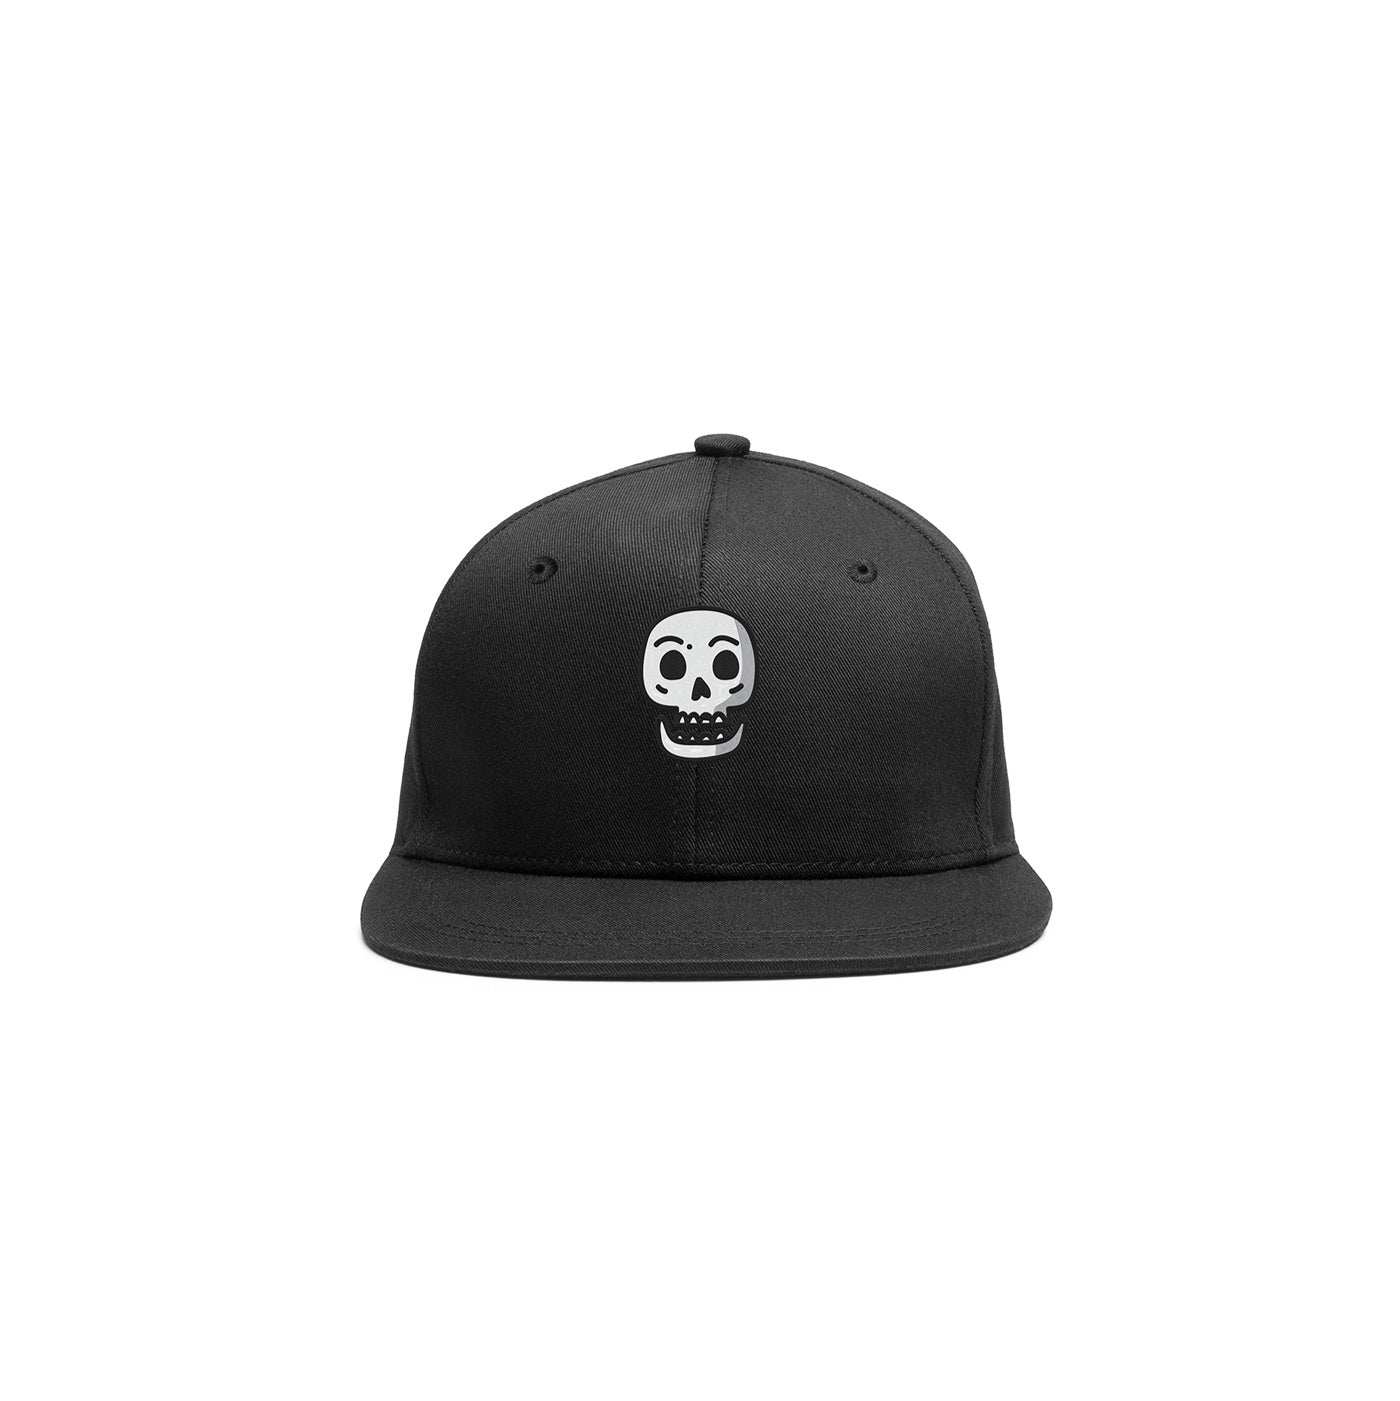 Embroidered Simple Skull Cap